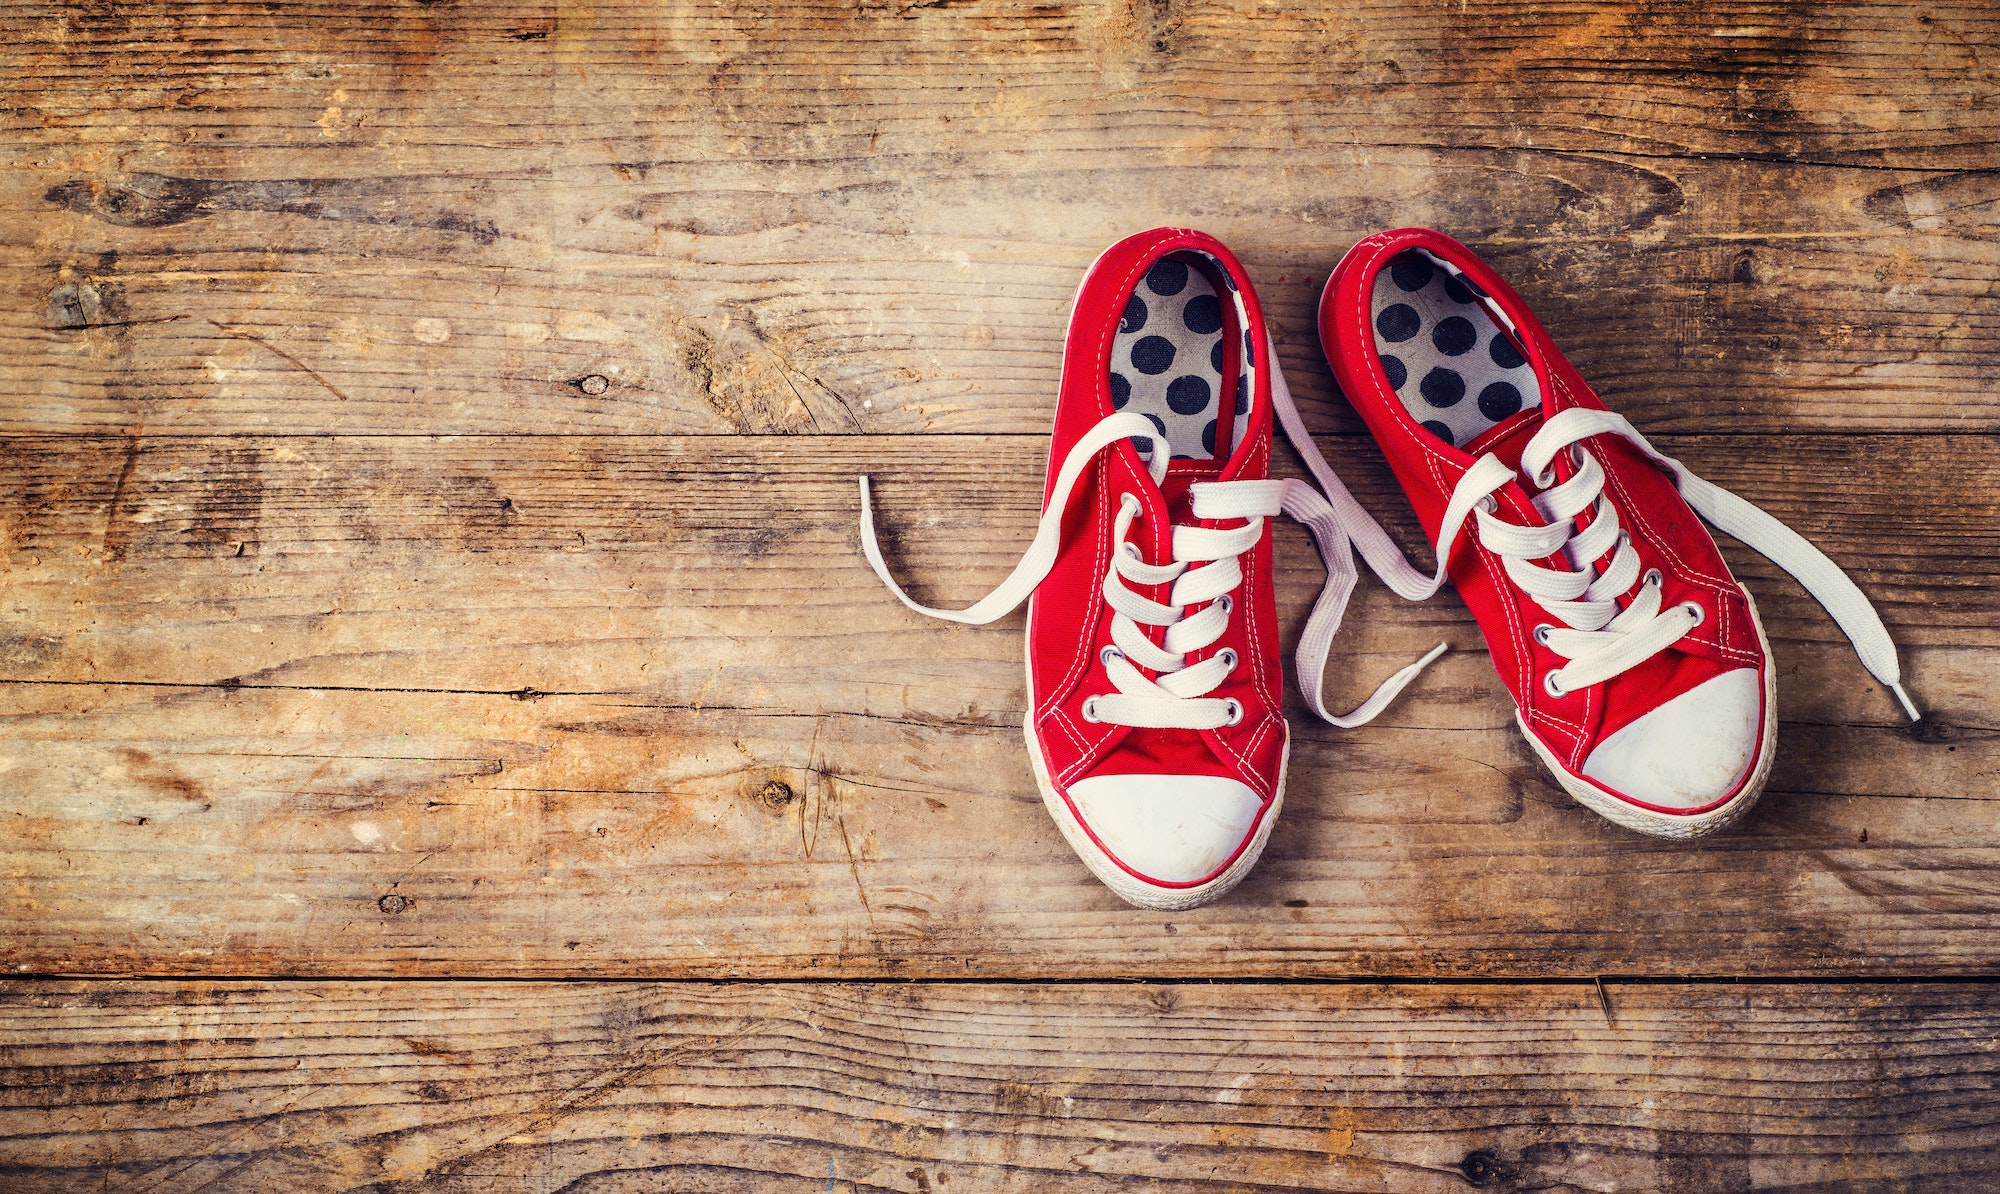 Red sneakers on a wooden floor